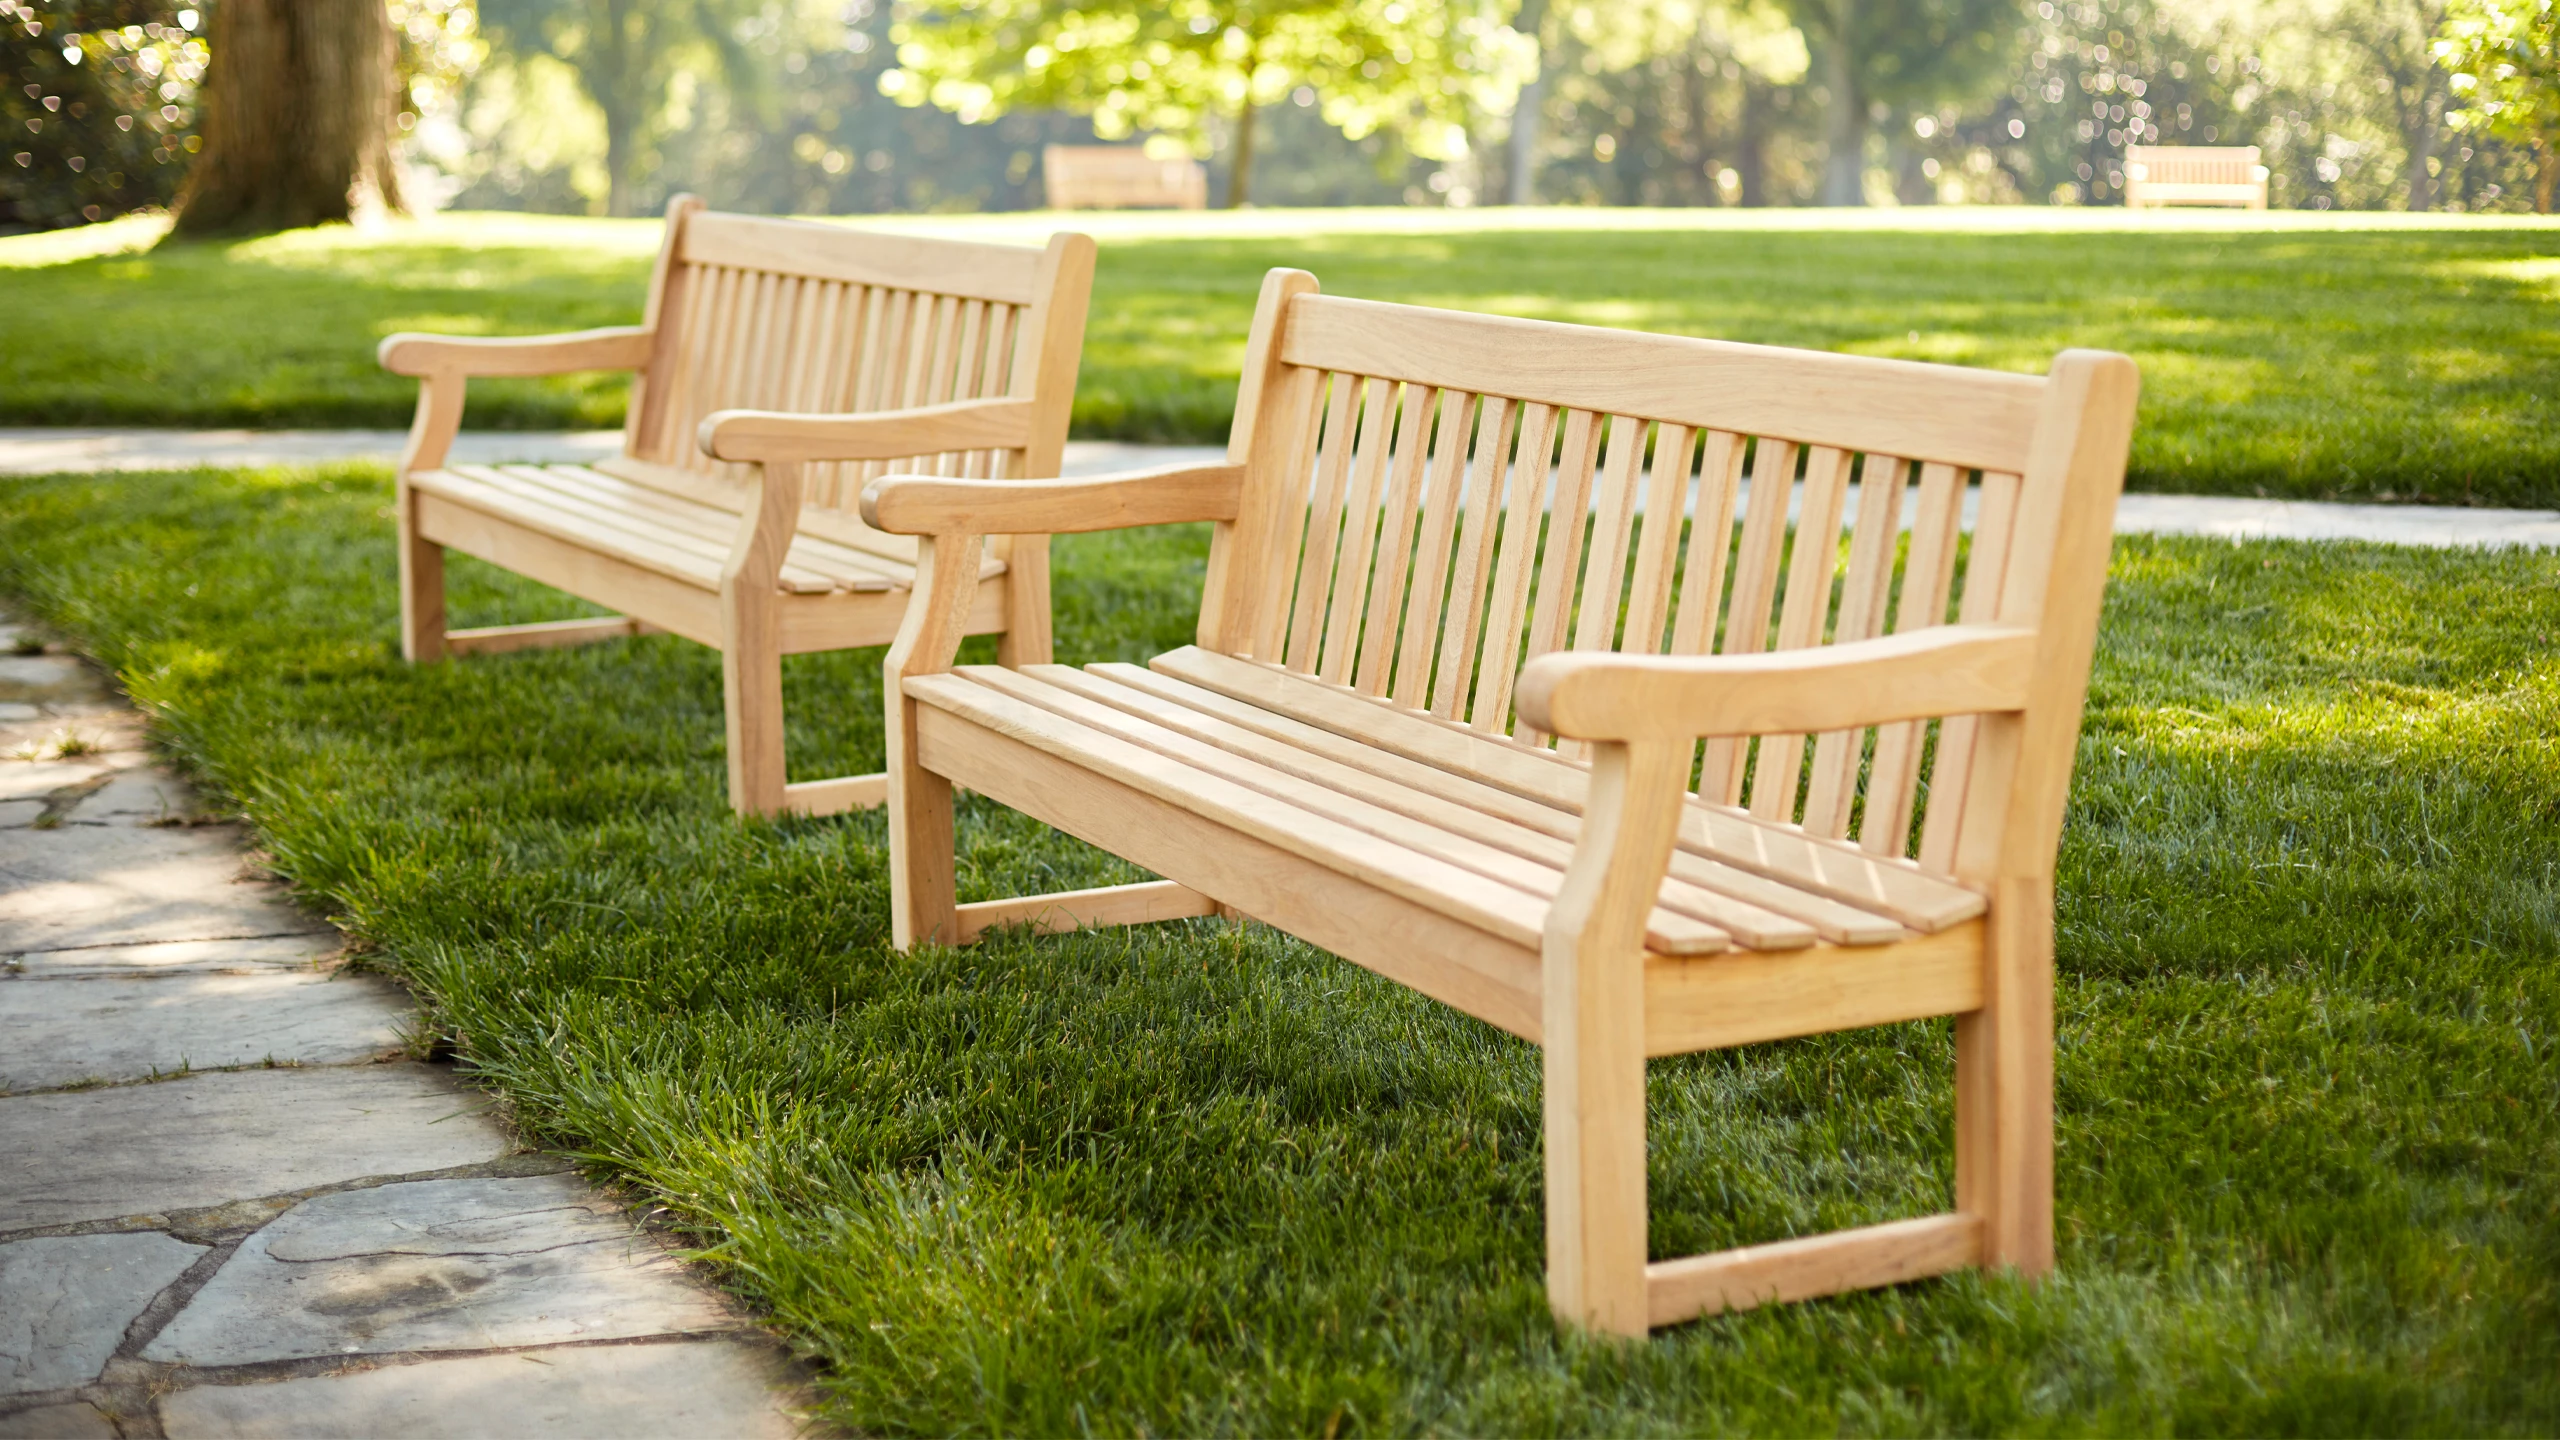 How To Look After Your New Wooden Garden Furniture